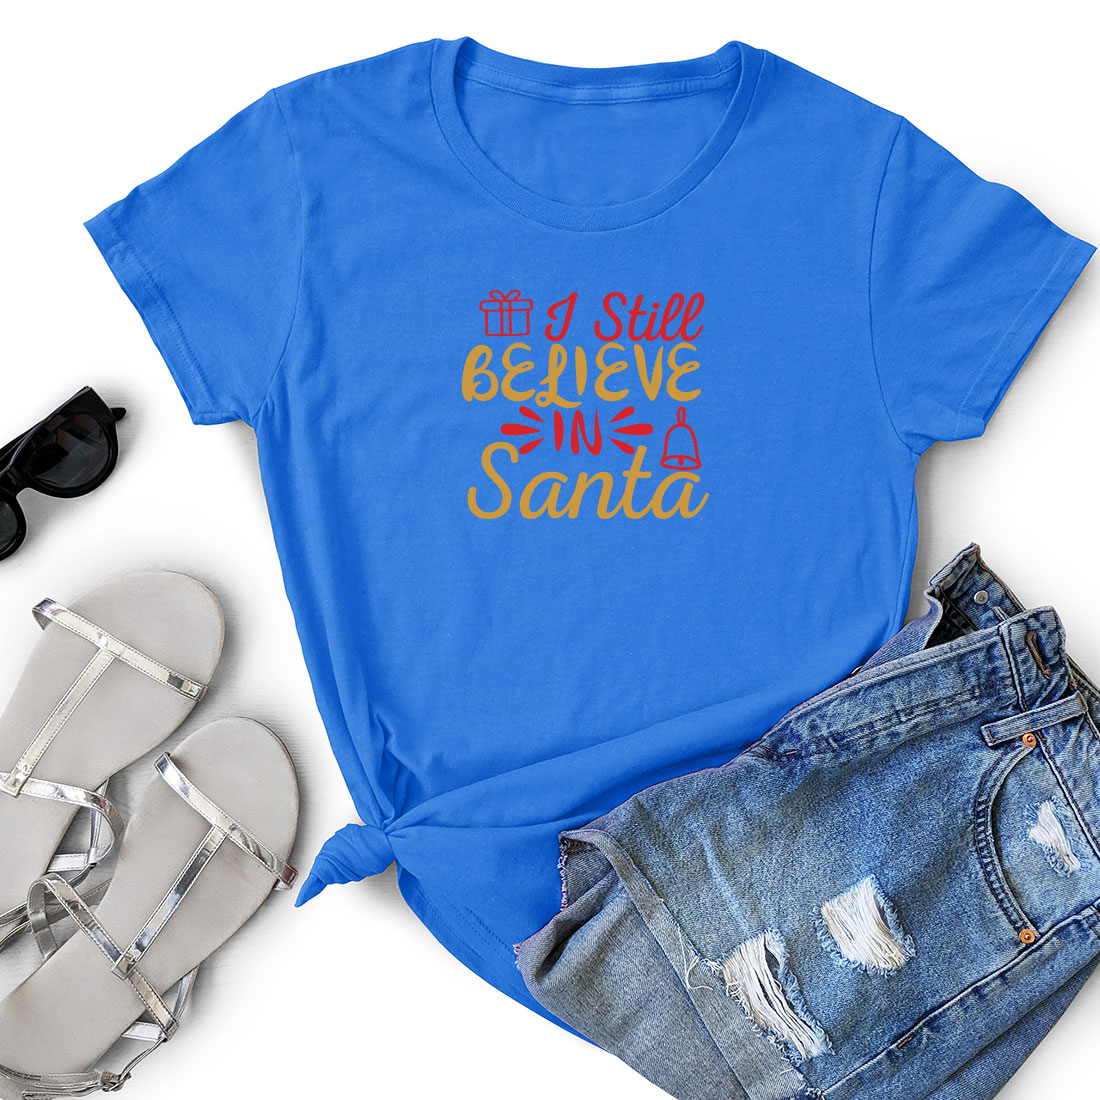 Blue t - shirt with the words get well done santa written on it.